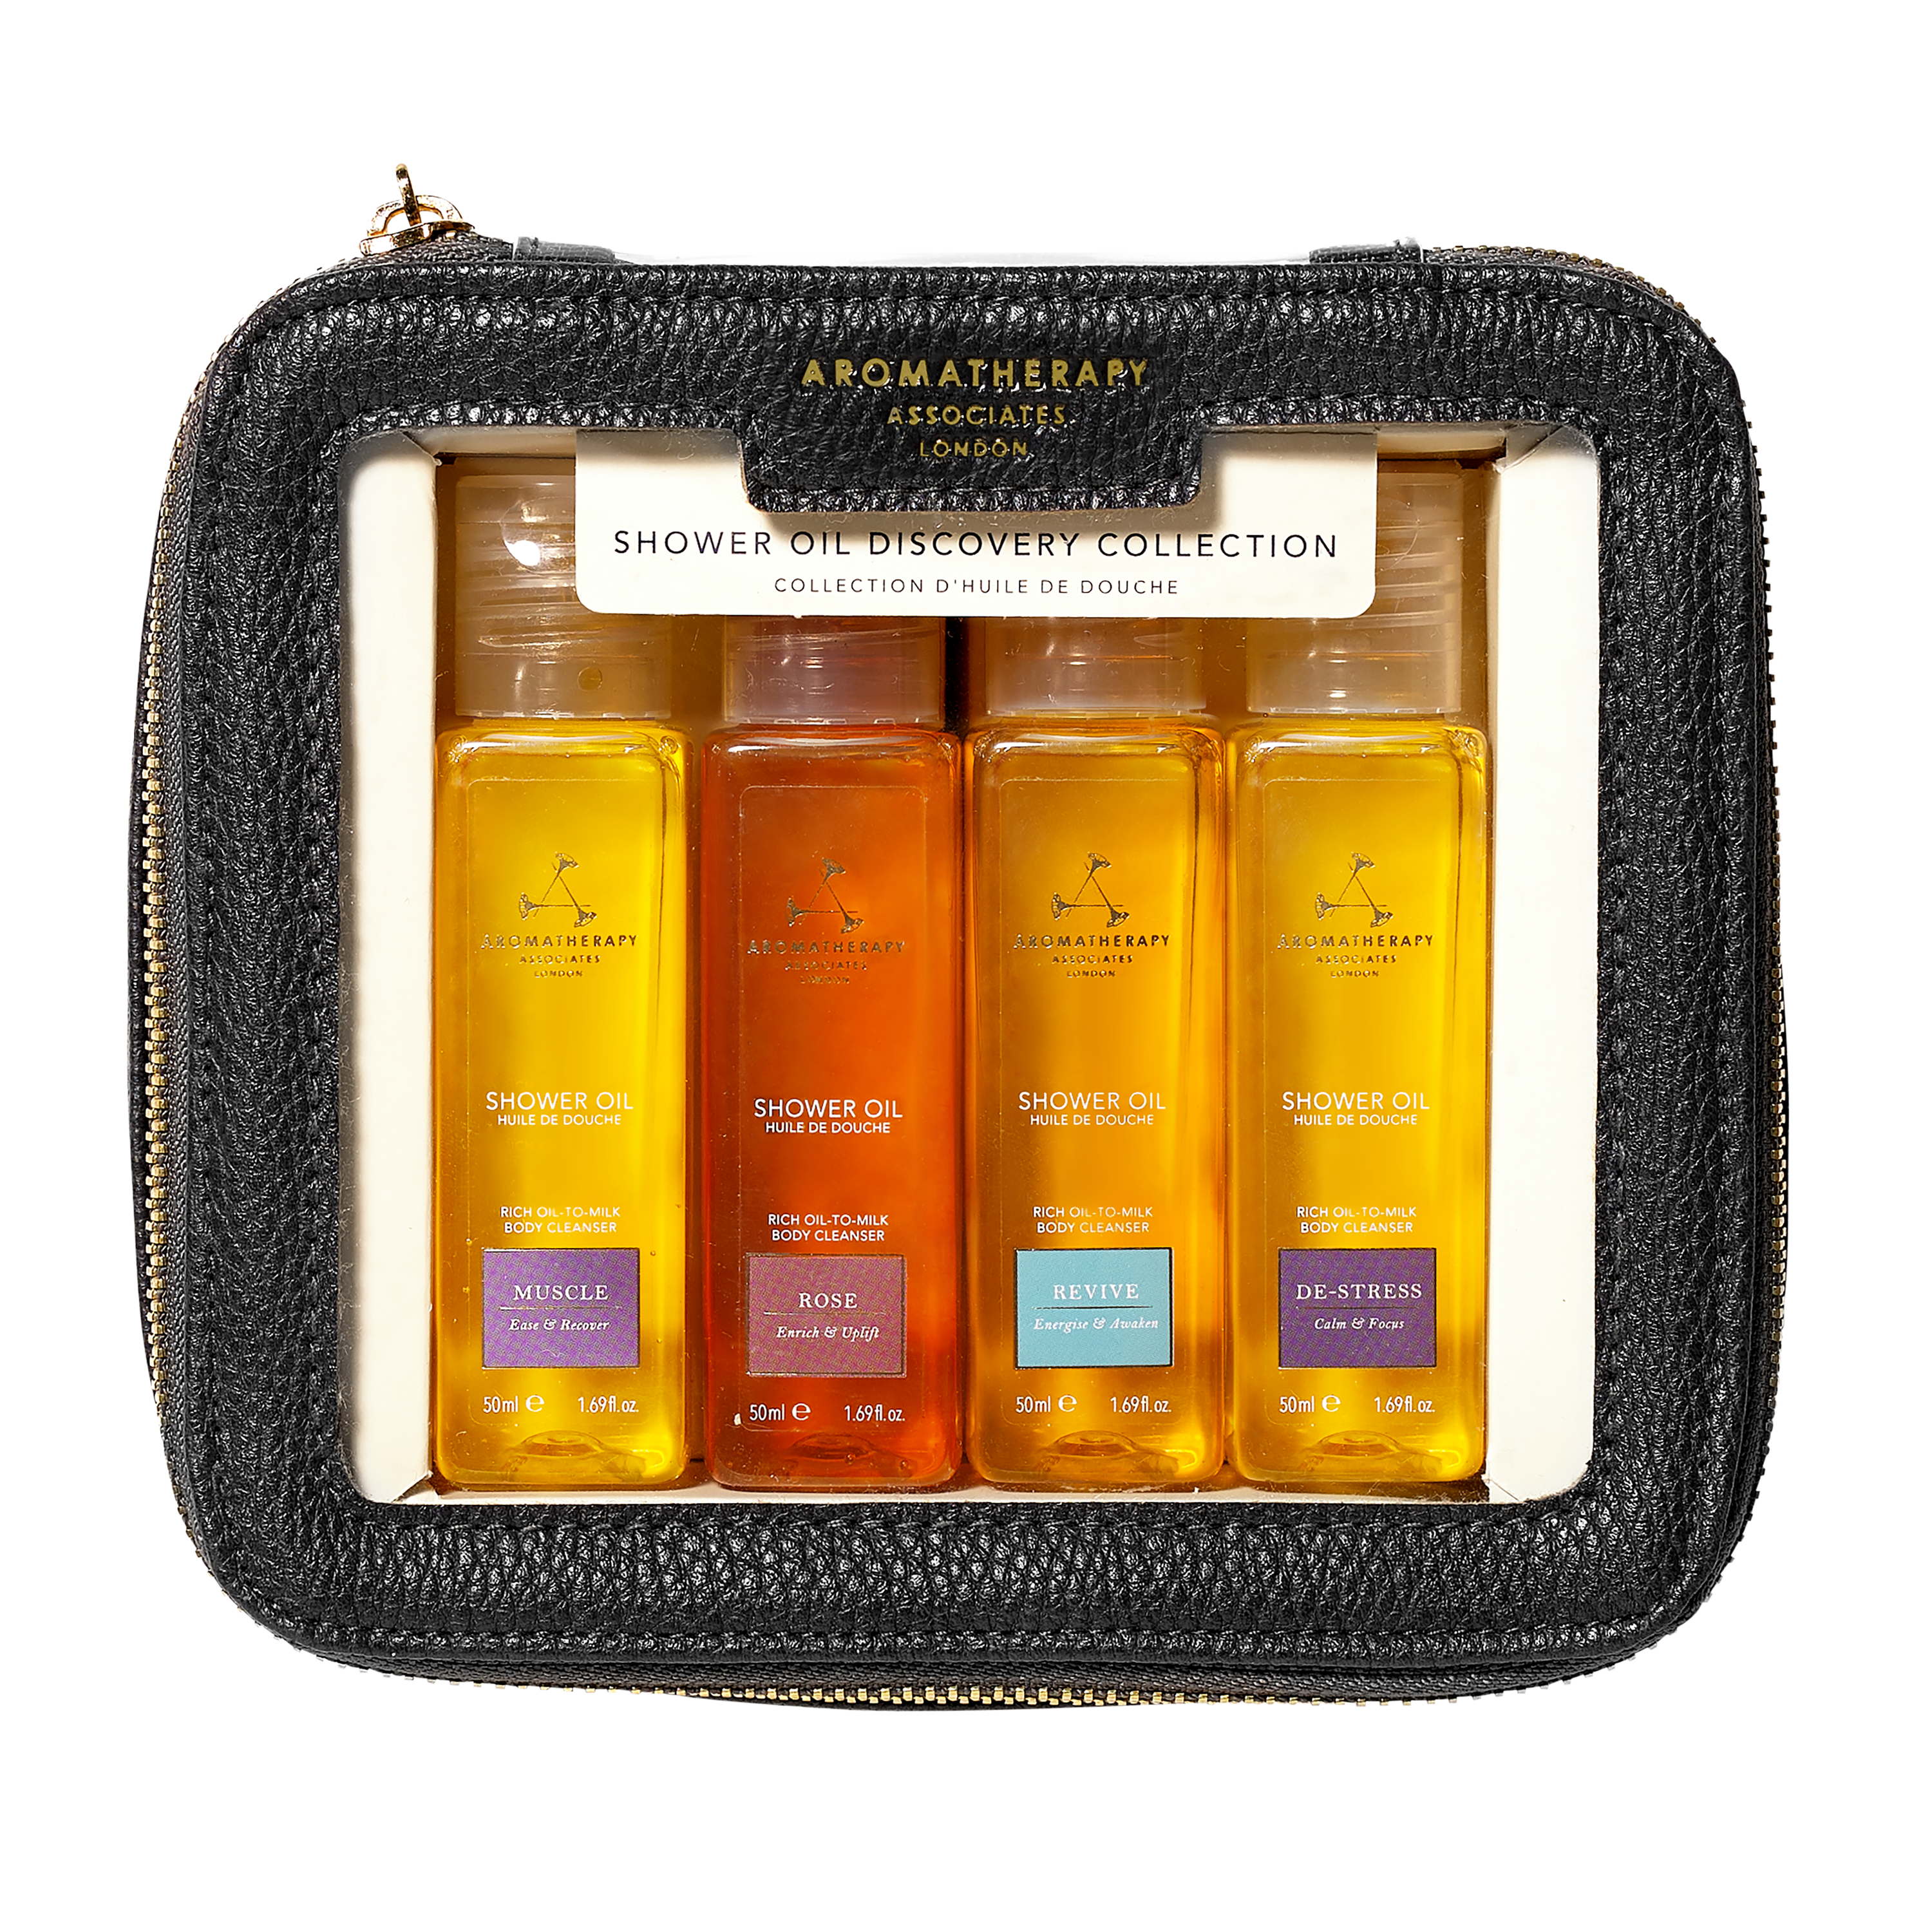 Mini Shower Oil Travel & Discovery Collection Aromatherapy Associates